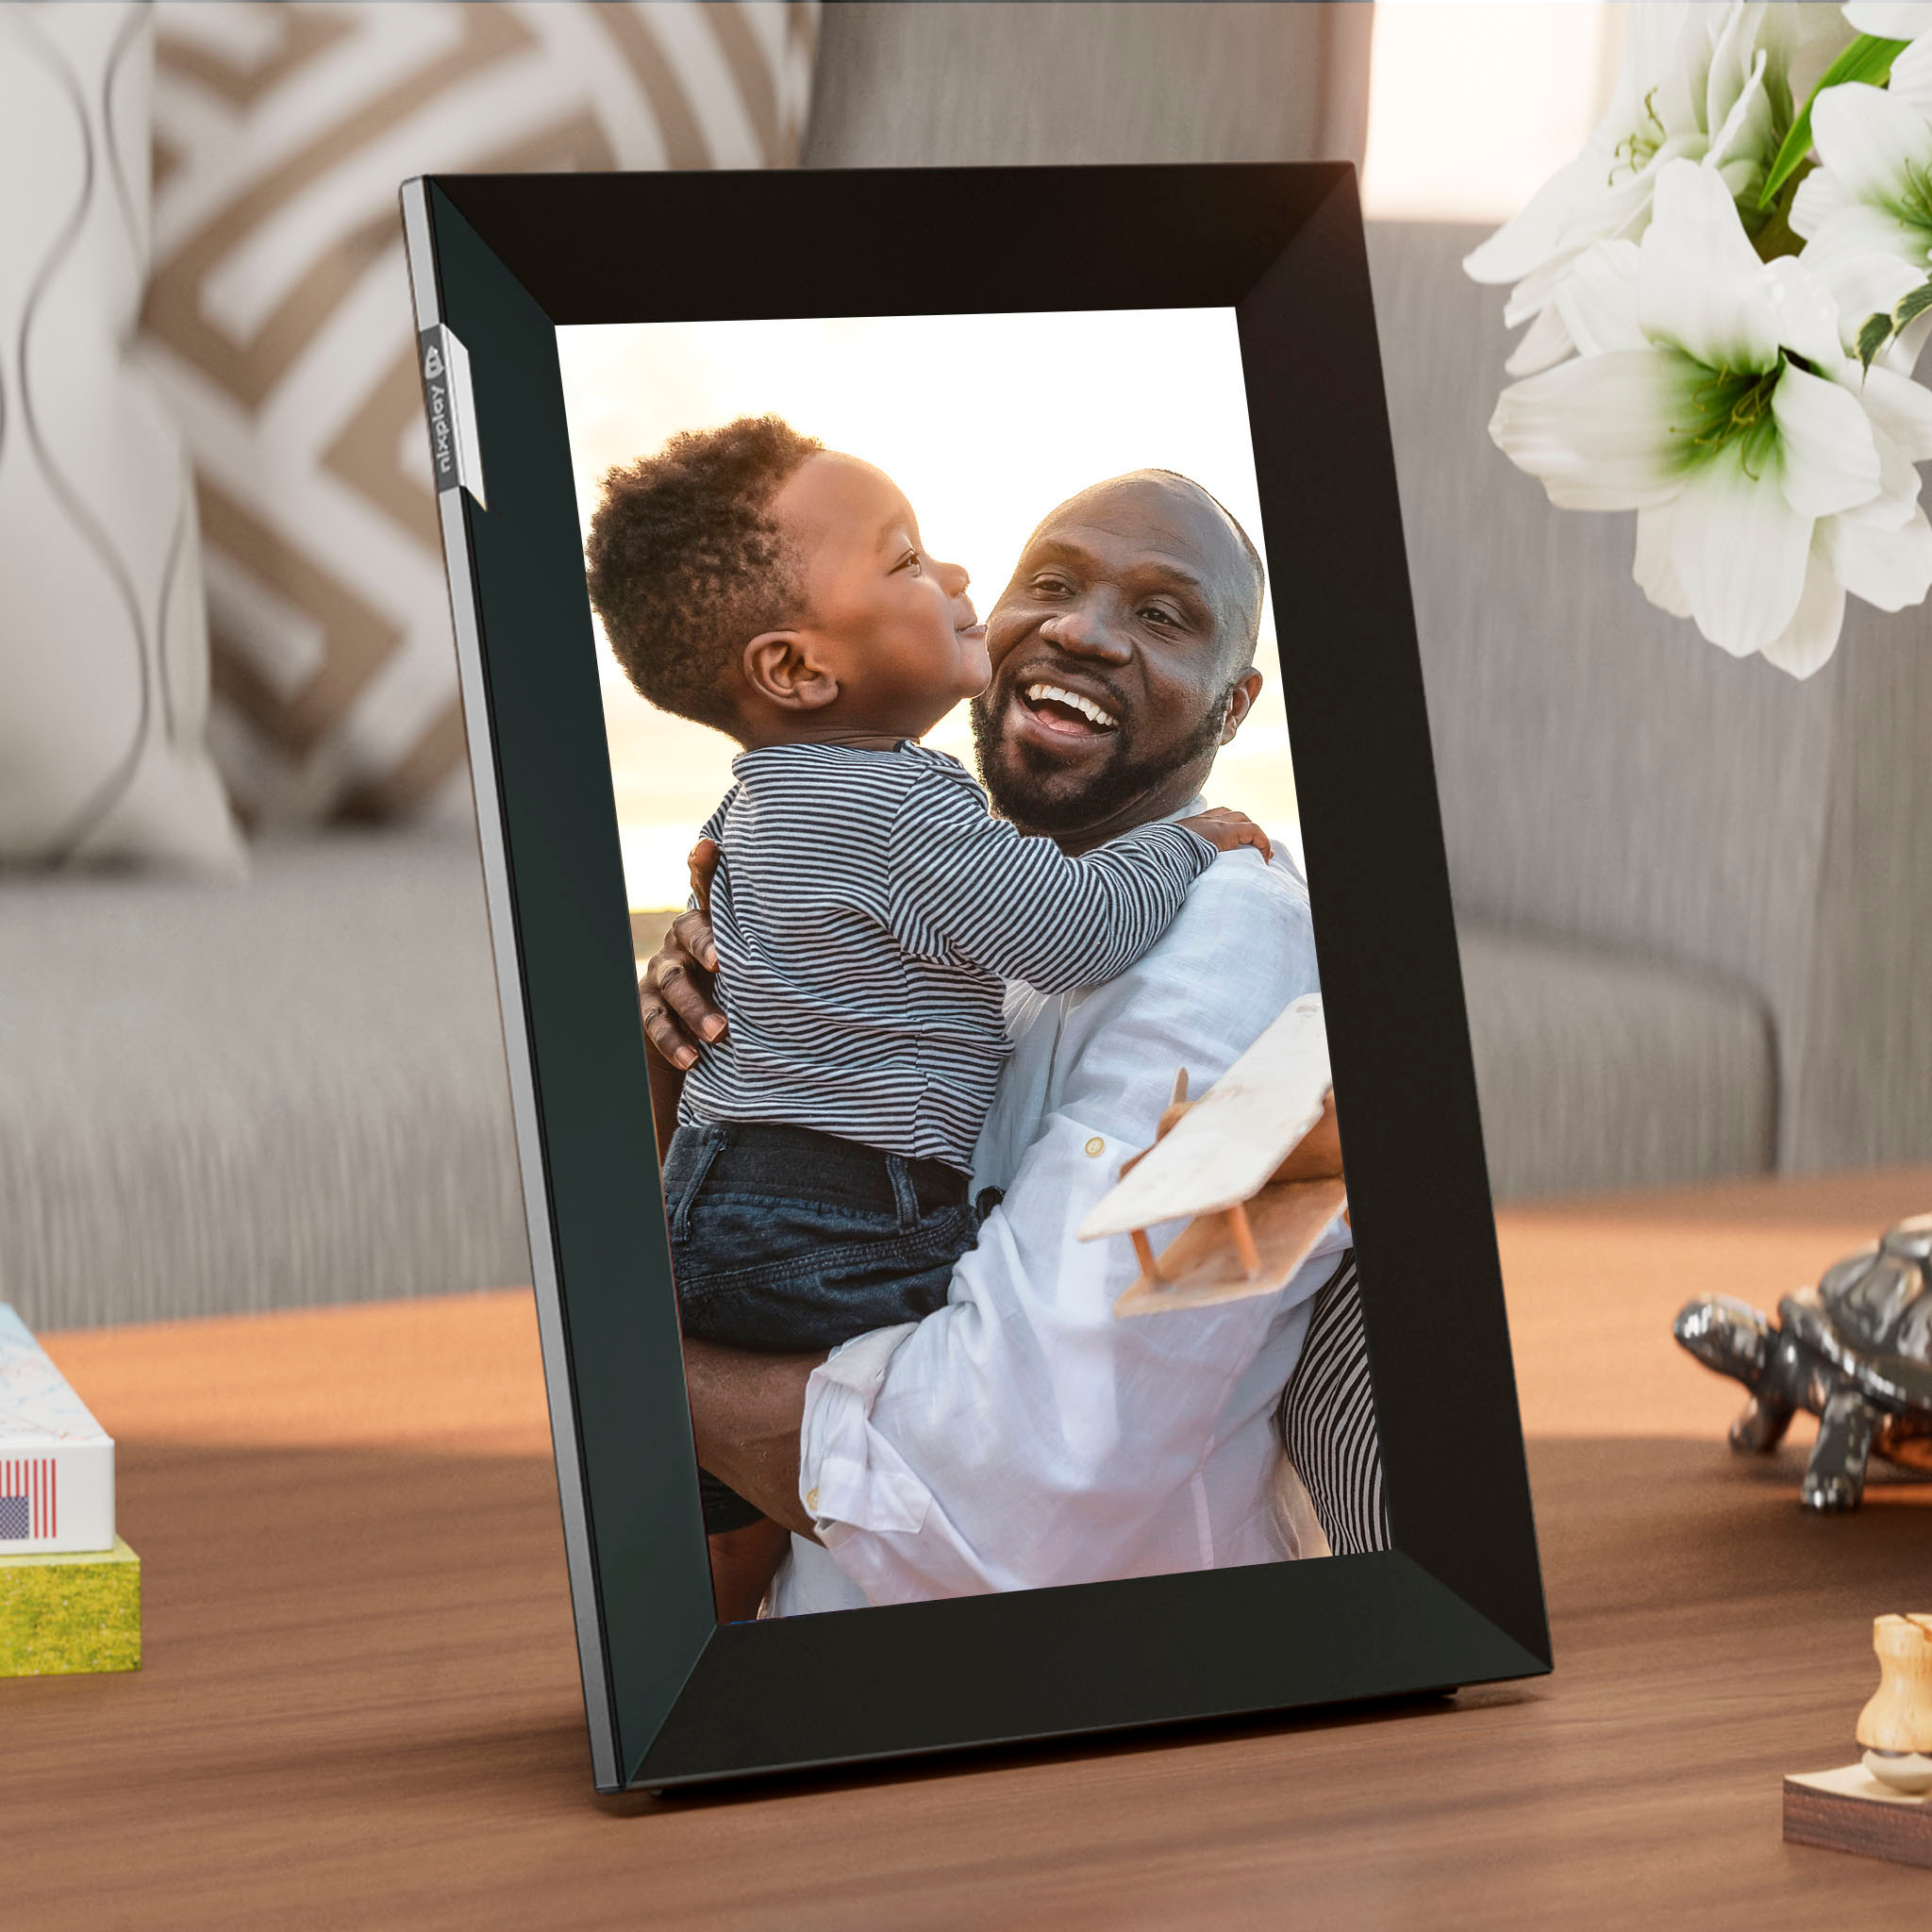 Left View: Nixplay - W10K Touch 10.1-inch LCD Smart Digital Photo Frame - Black/Silver